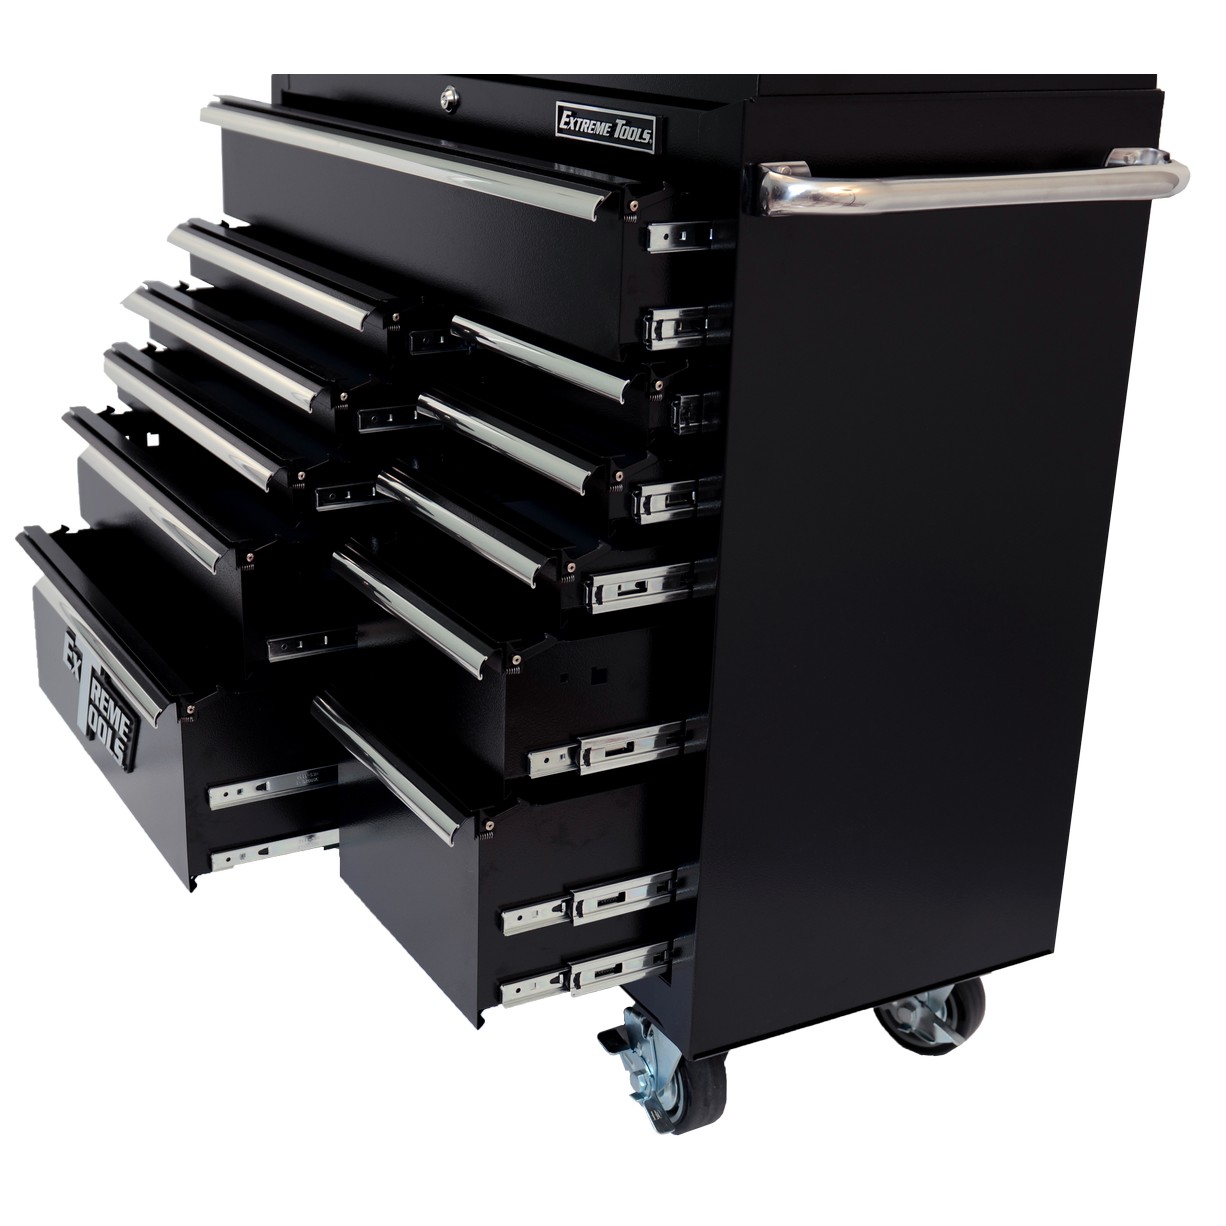 Extreme Tools PWS4124RCTXBK 41 inch 11 Drawer 24 inch Deep Roller Cabinet - Black